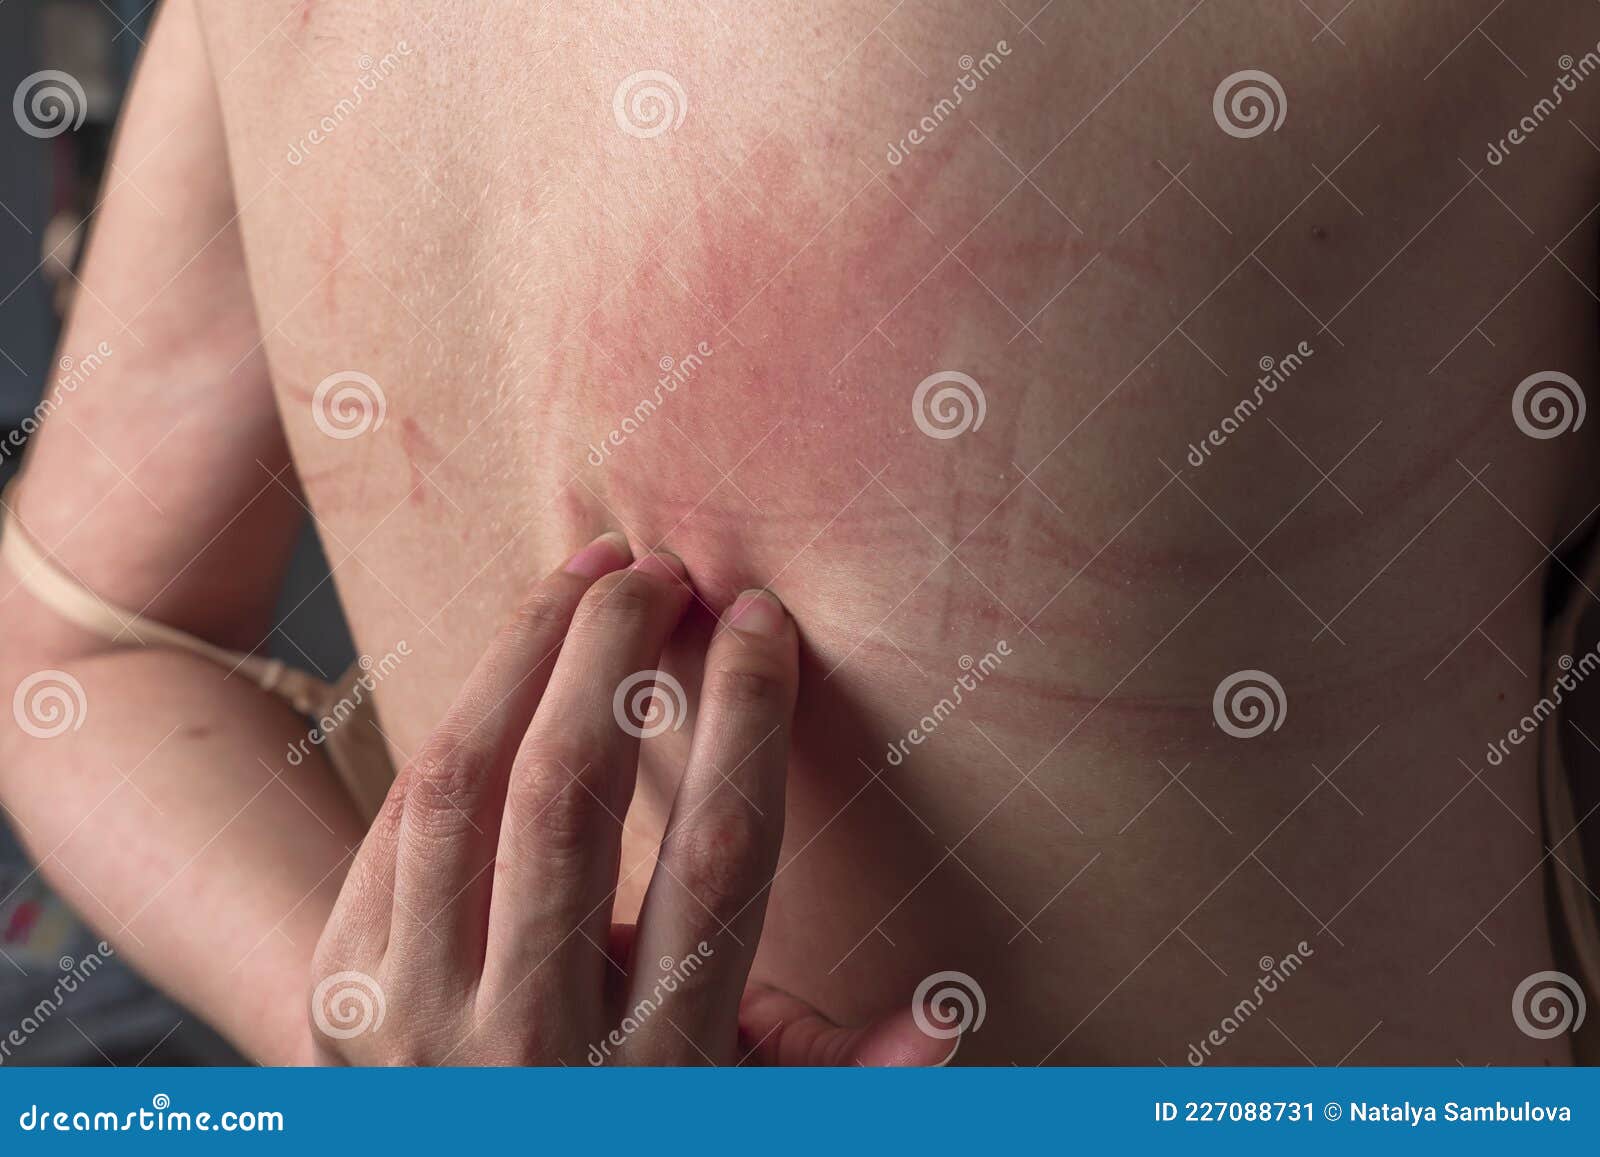 https://thumbs.dreamstime.com/z/bra-marks-back-girl-rubbed-her-underwear-uncomfortable-wrong-size-traces-clothing-body-woman-s-positive-self-love-227088731.jpg